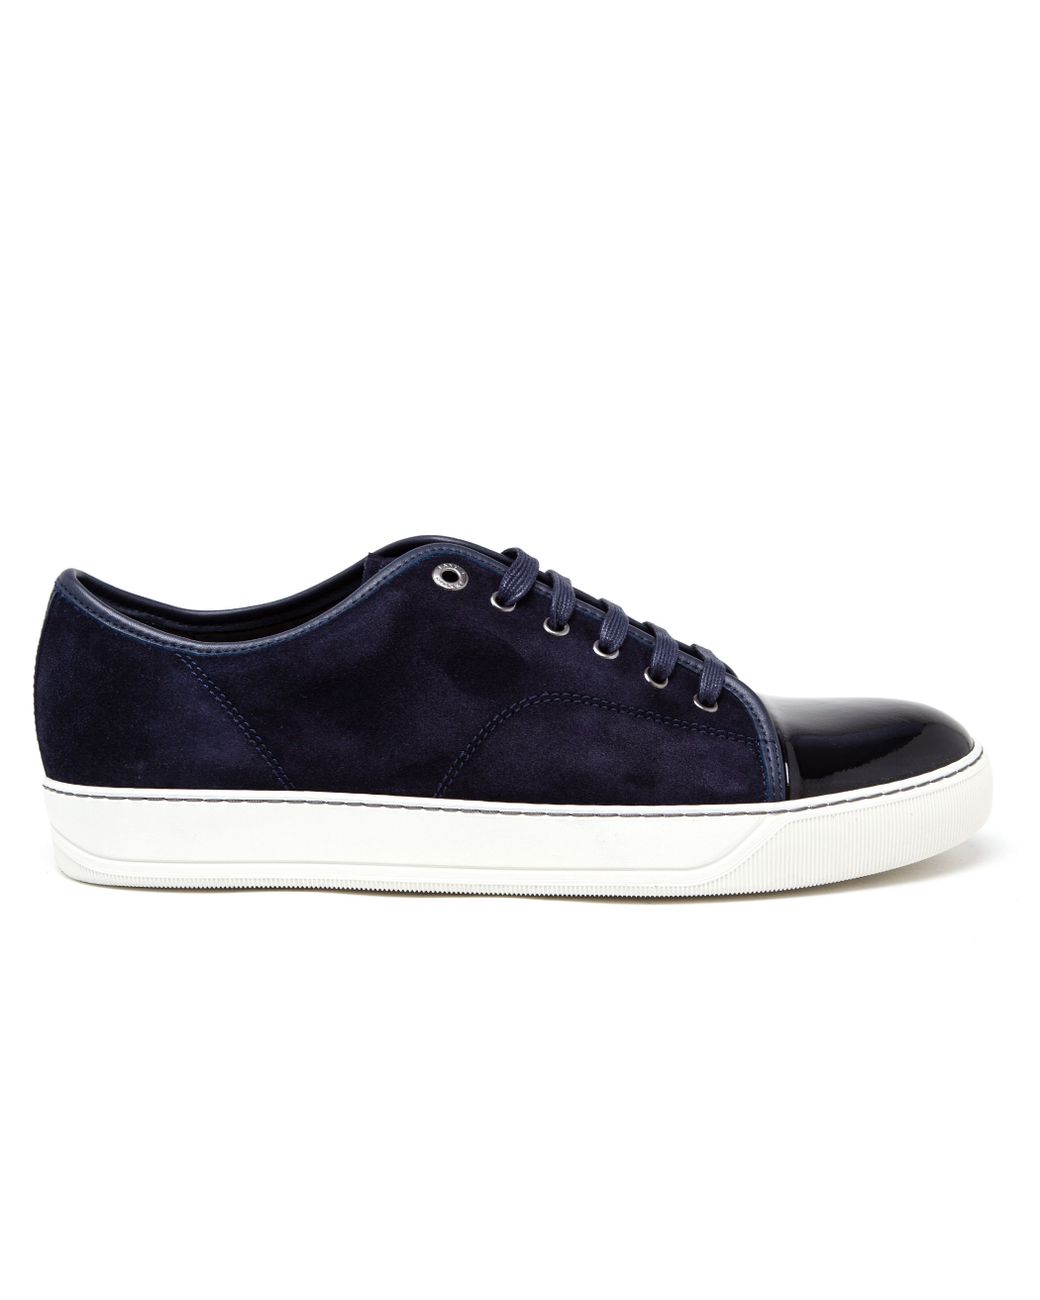 Lanvin Suede And Patent Leather Sneakers in Blue for Men | Lyst